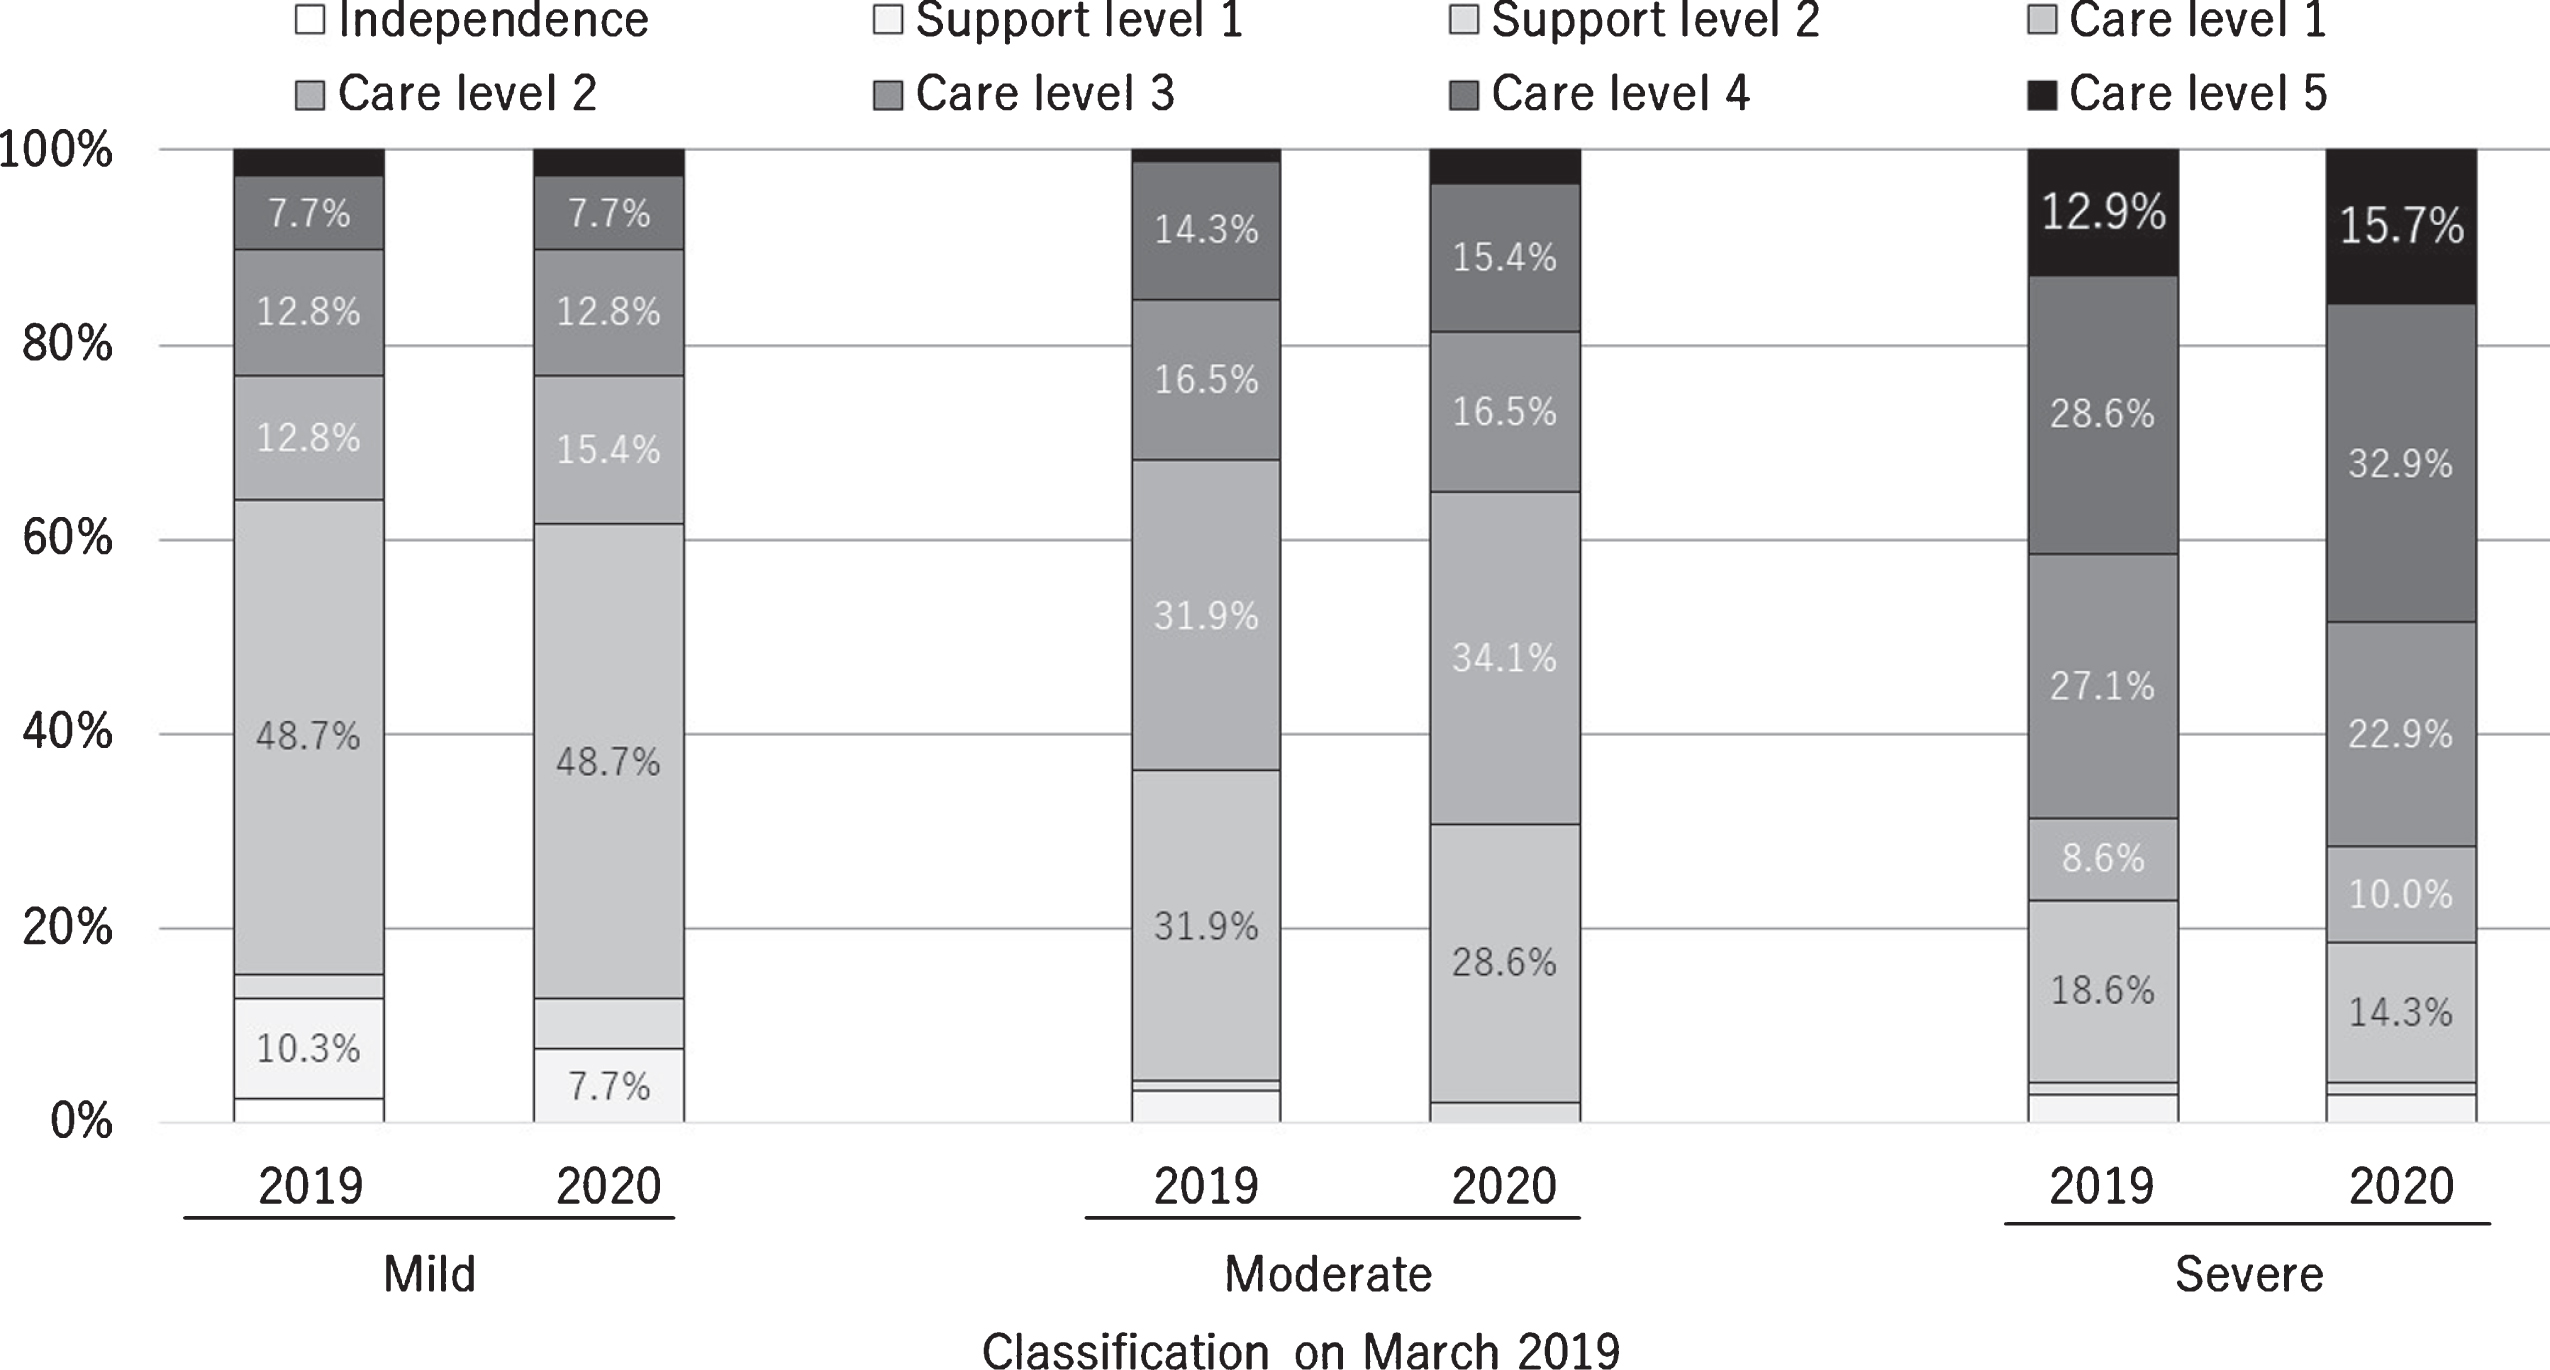 Certifications for long-term care or support need in March 2019 and 2020 according to the severity of dementia in March 2019.